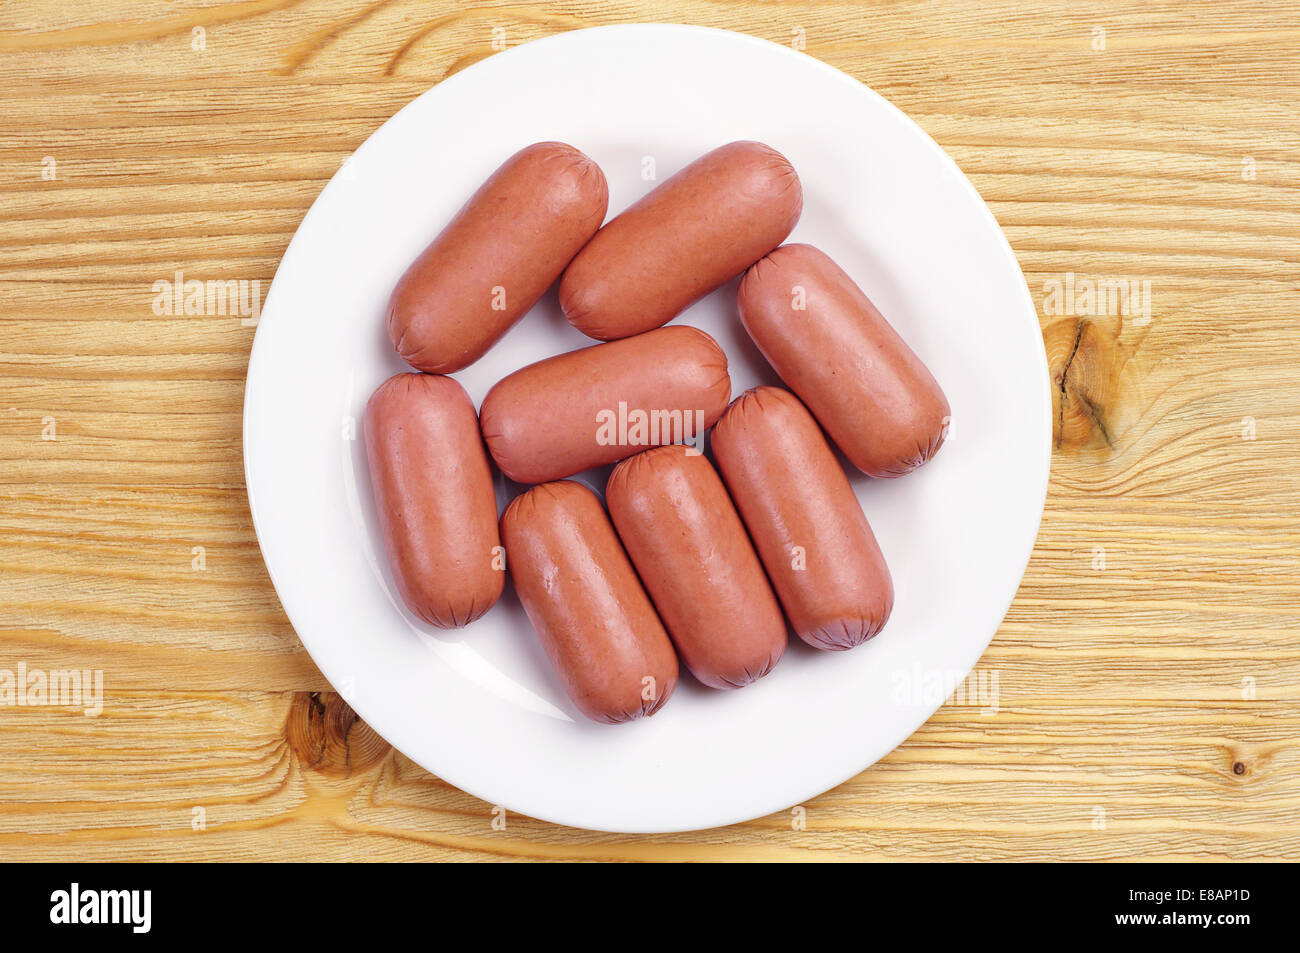 Small sausages in a plate on a wooden background, Top view Stock Photo